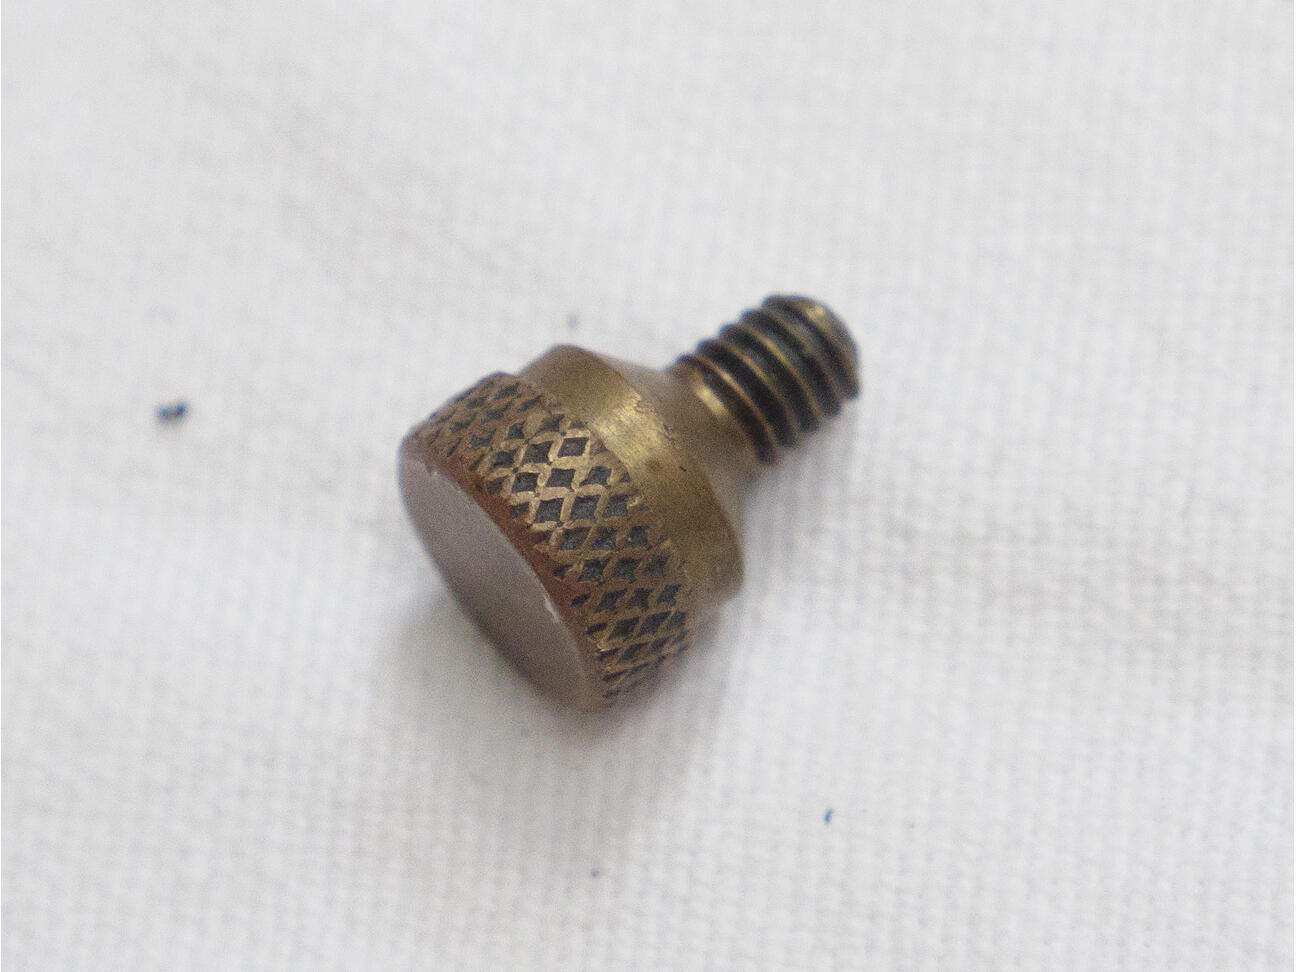 Wintec, maybe lapco brass Side Valve Body screw for nelson pump. Used shape, one included